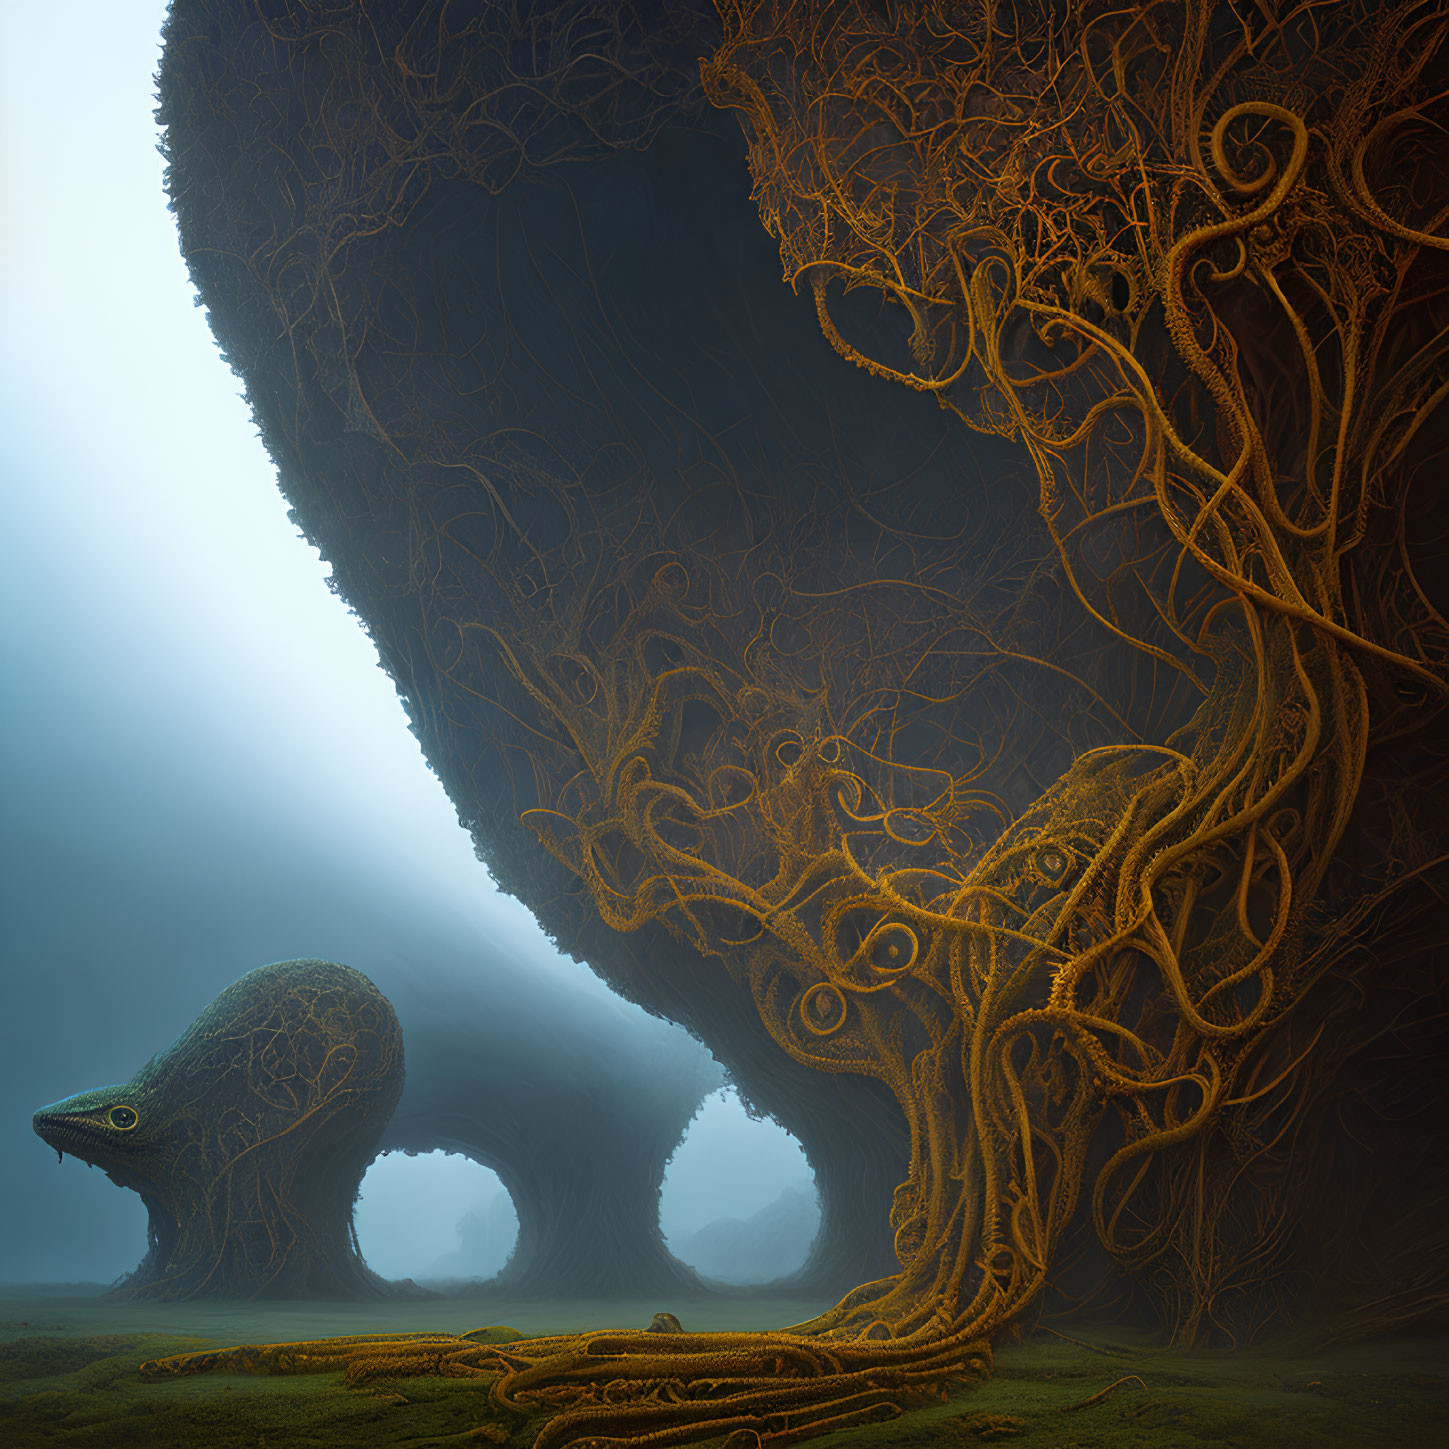 Surreal landscape with tree-like canopy and creature head opening